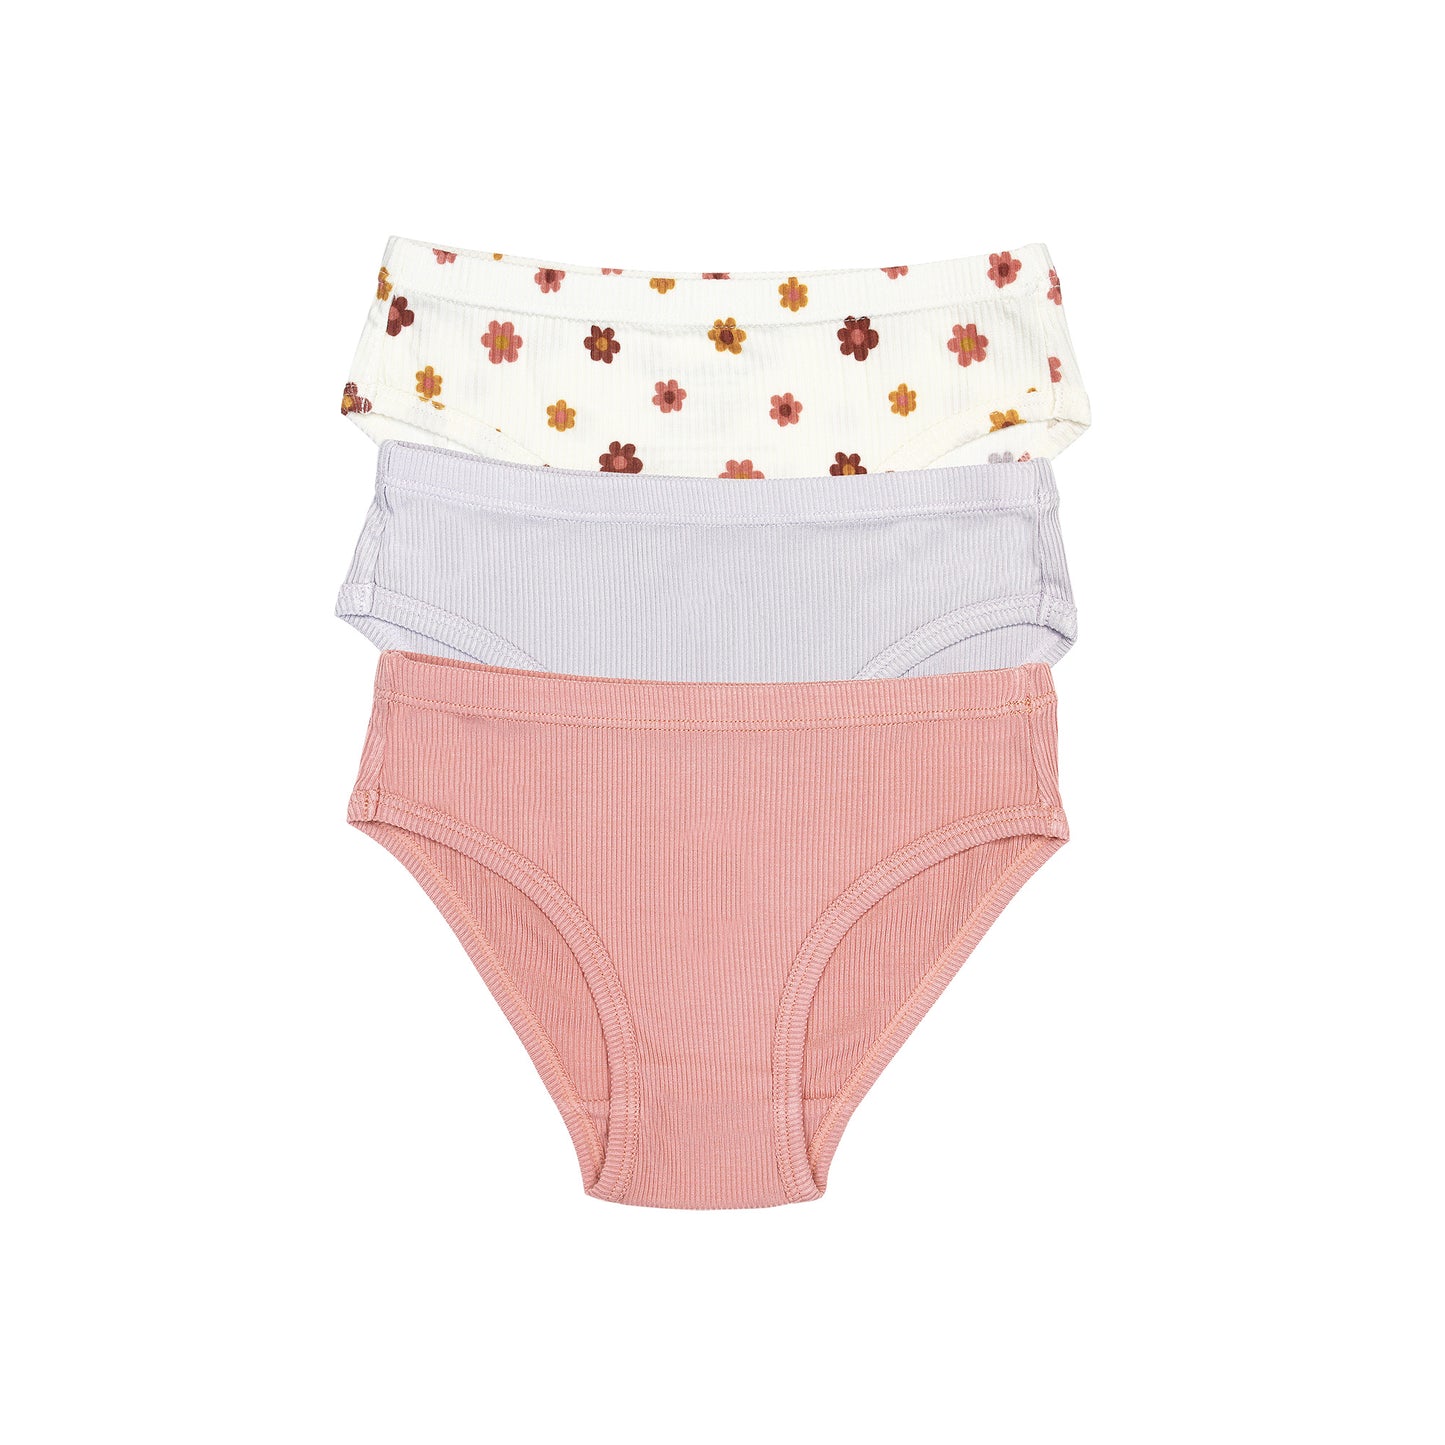 Pink Daisies, Mauve and Lilac Underwear 3 Pack